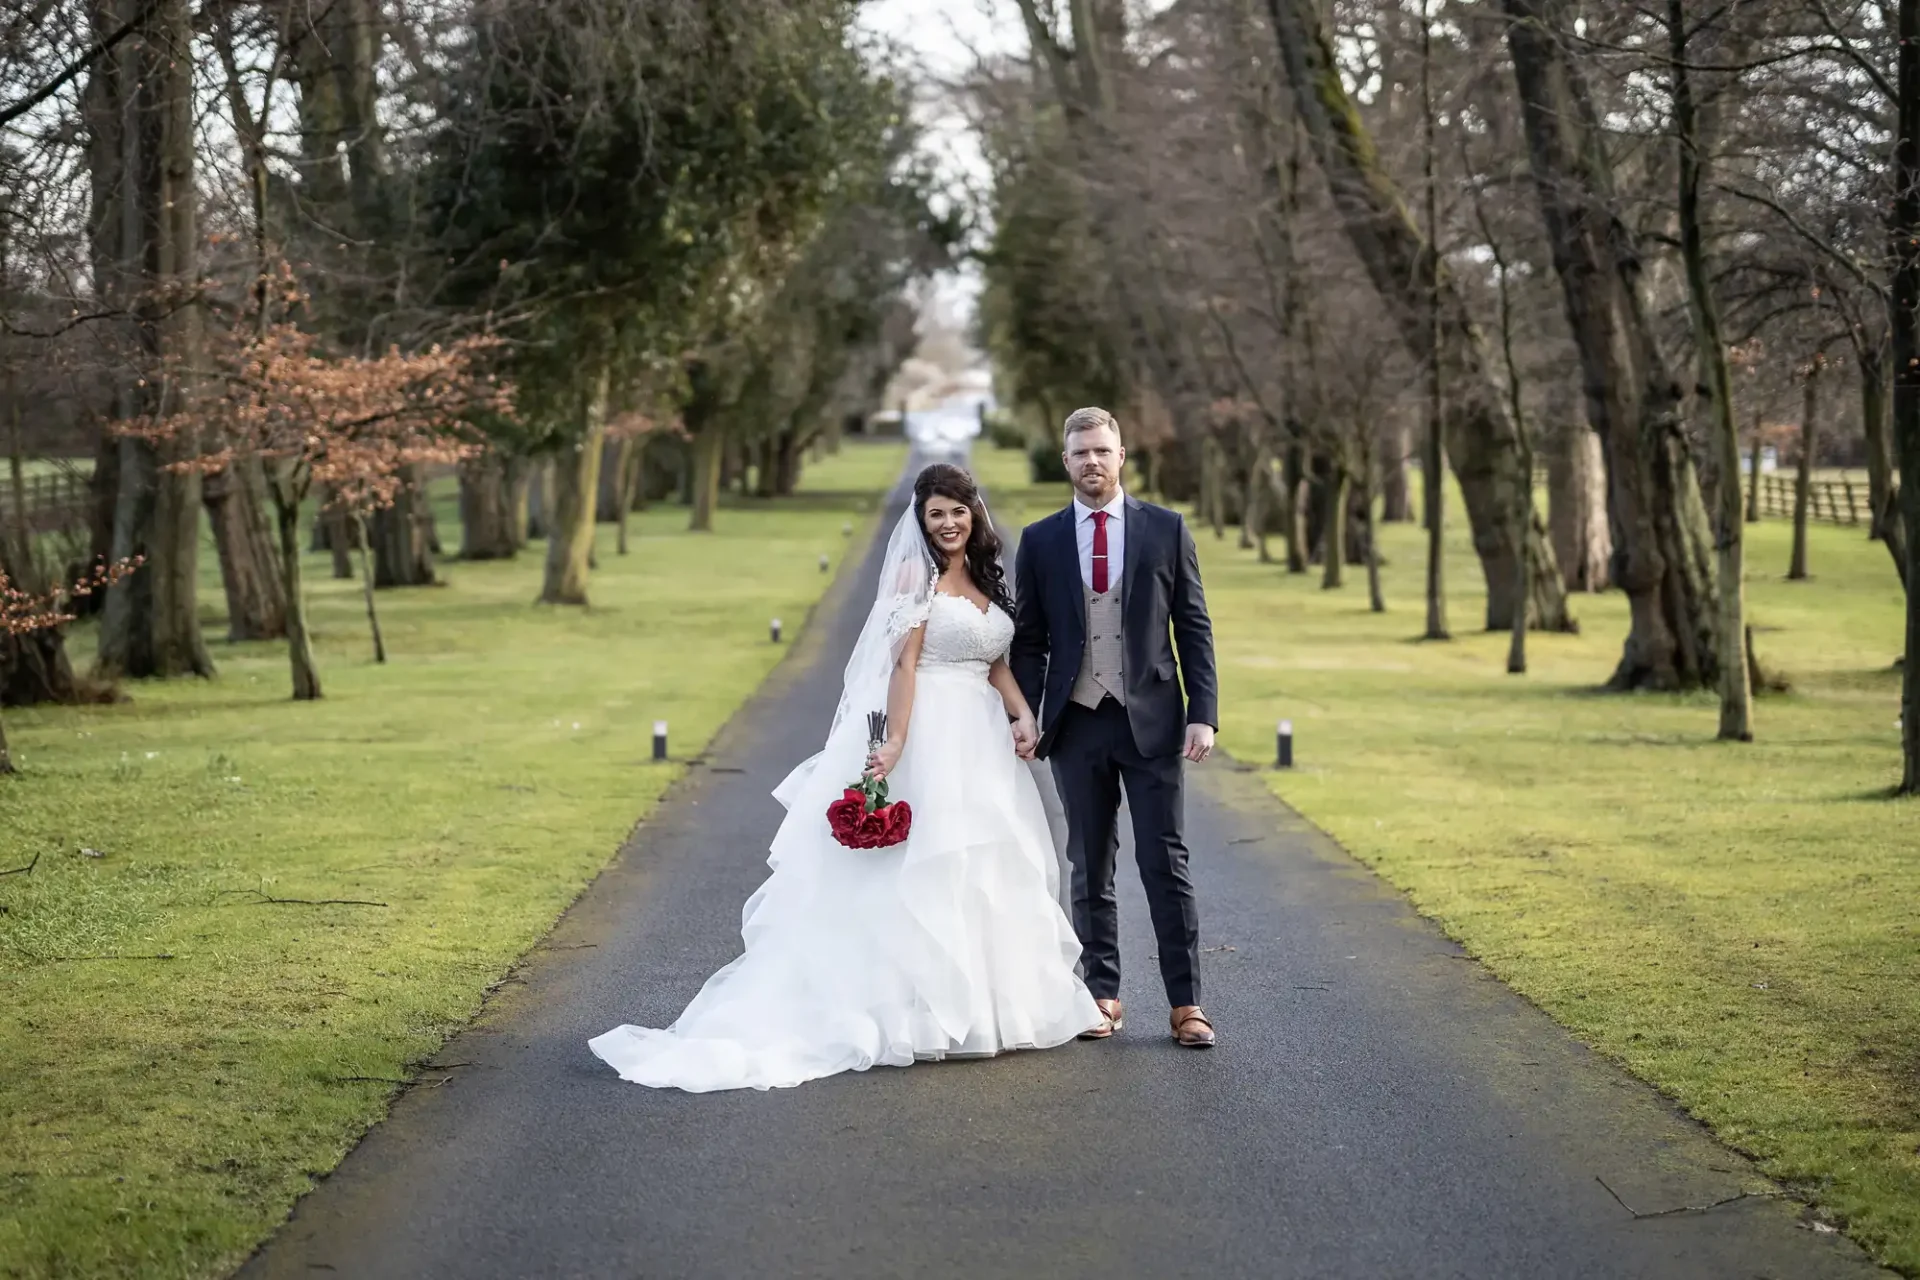 A bride and groom holding hands, walking down a tree-lined pathway, the bride in a white dress and the groom in a suit with red tie.